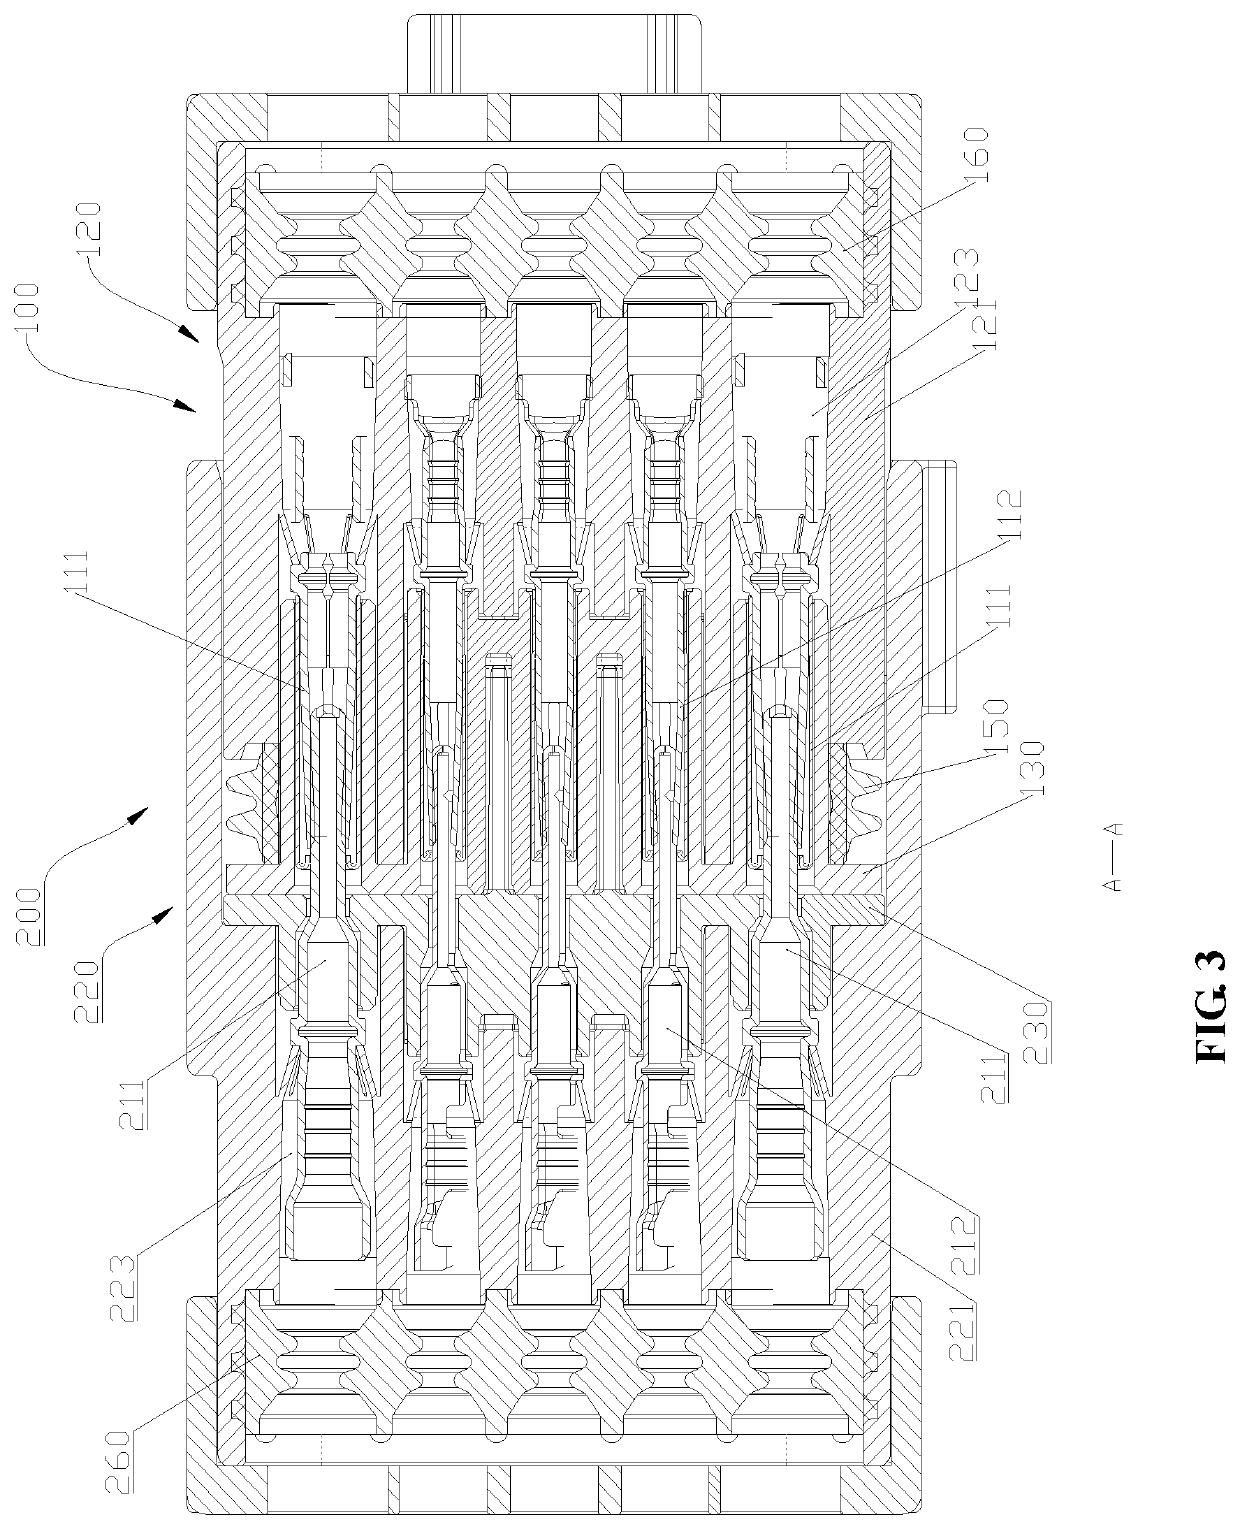 Connector and connector assembly for fixing connection terminals of different sizes